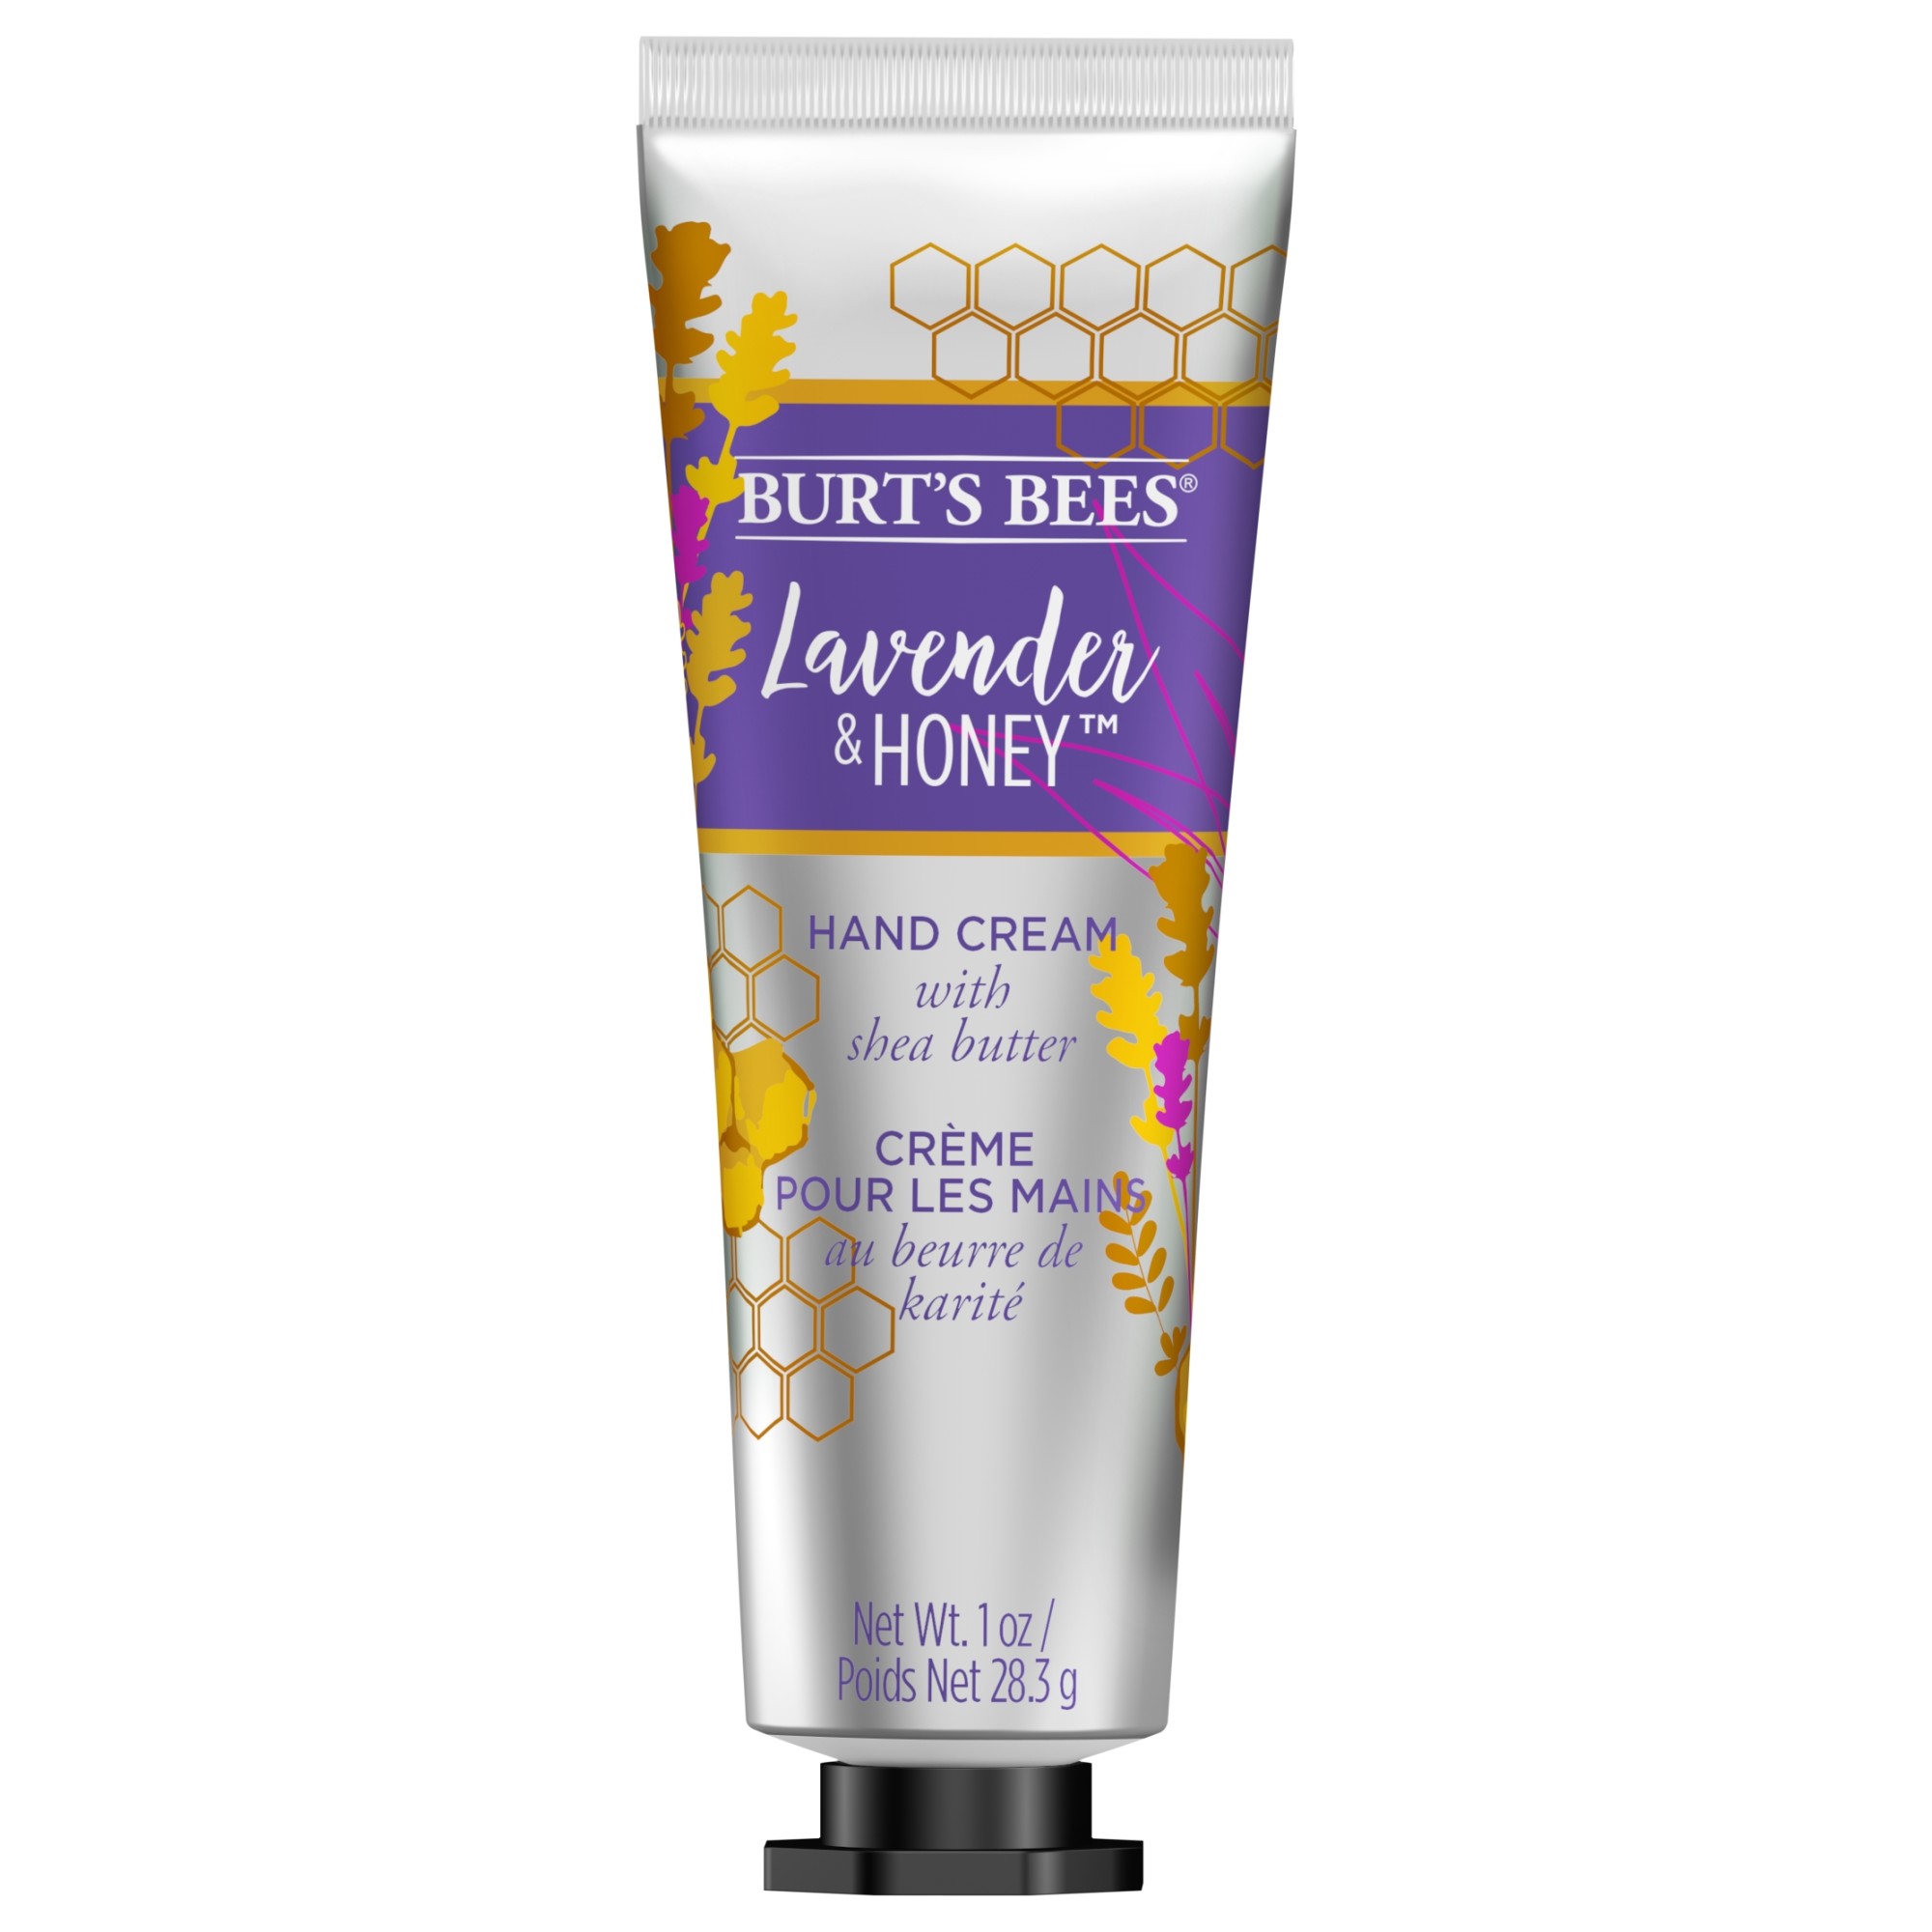 Burts Bees Lavender and Honey Hand Cream with Shea Butter, 1 Ounce - image 1 of 10